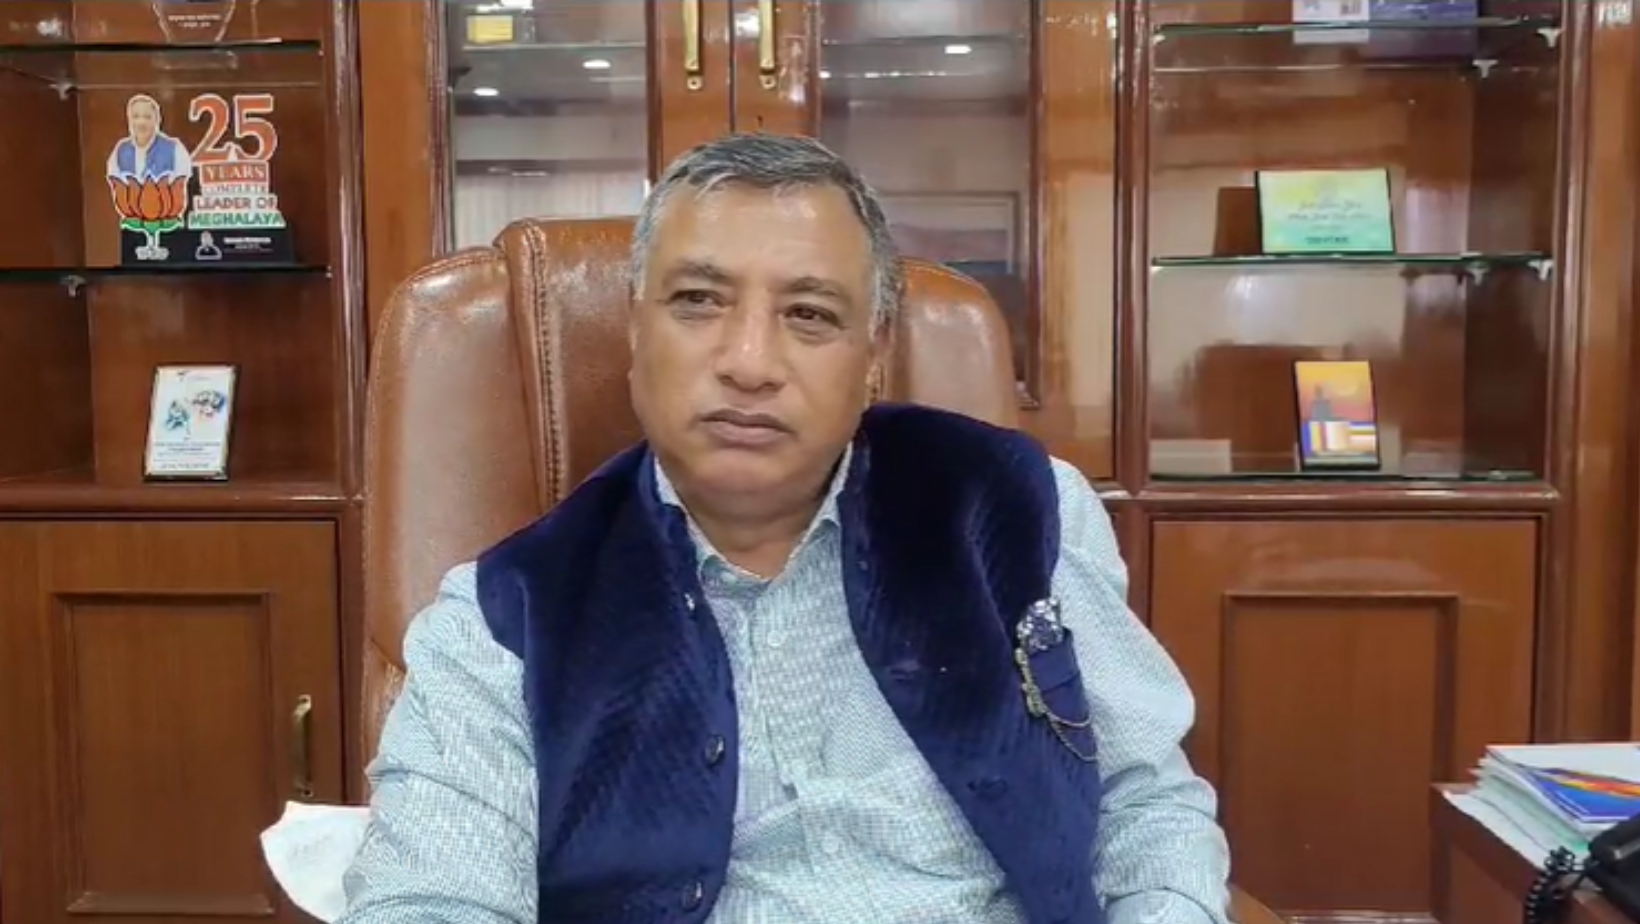 Hek assures to take stock on price of animal products such as beef, pork and chicken in Meghalaya